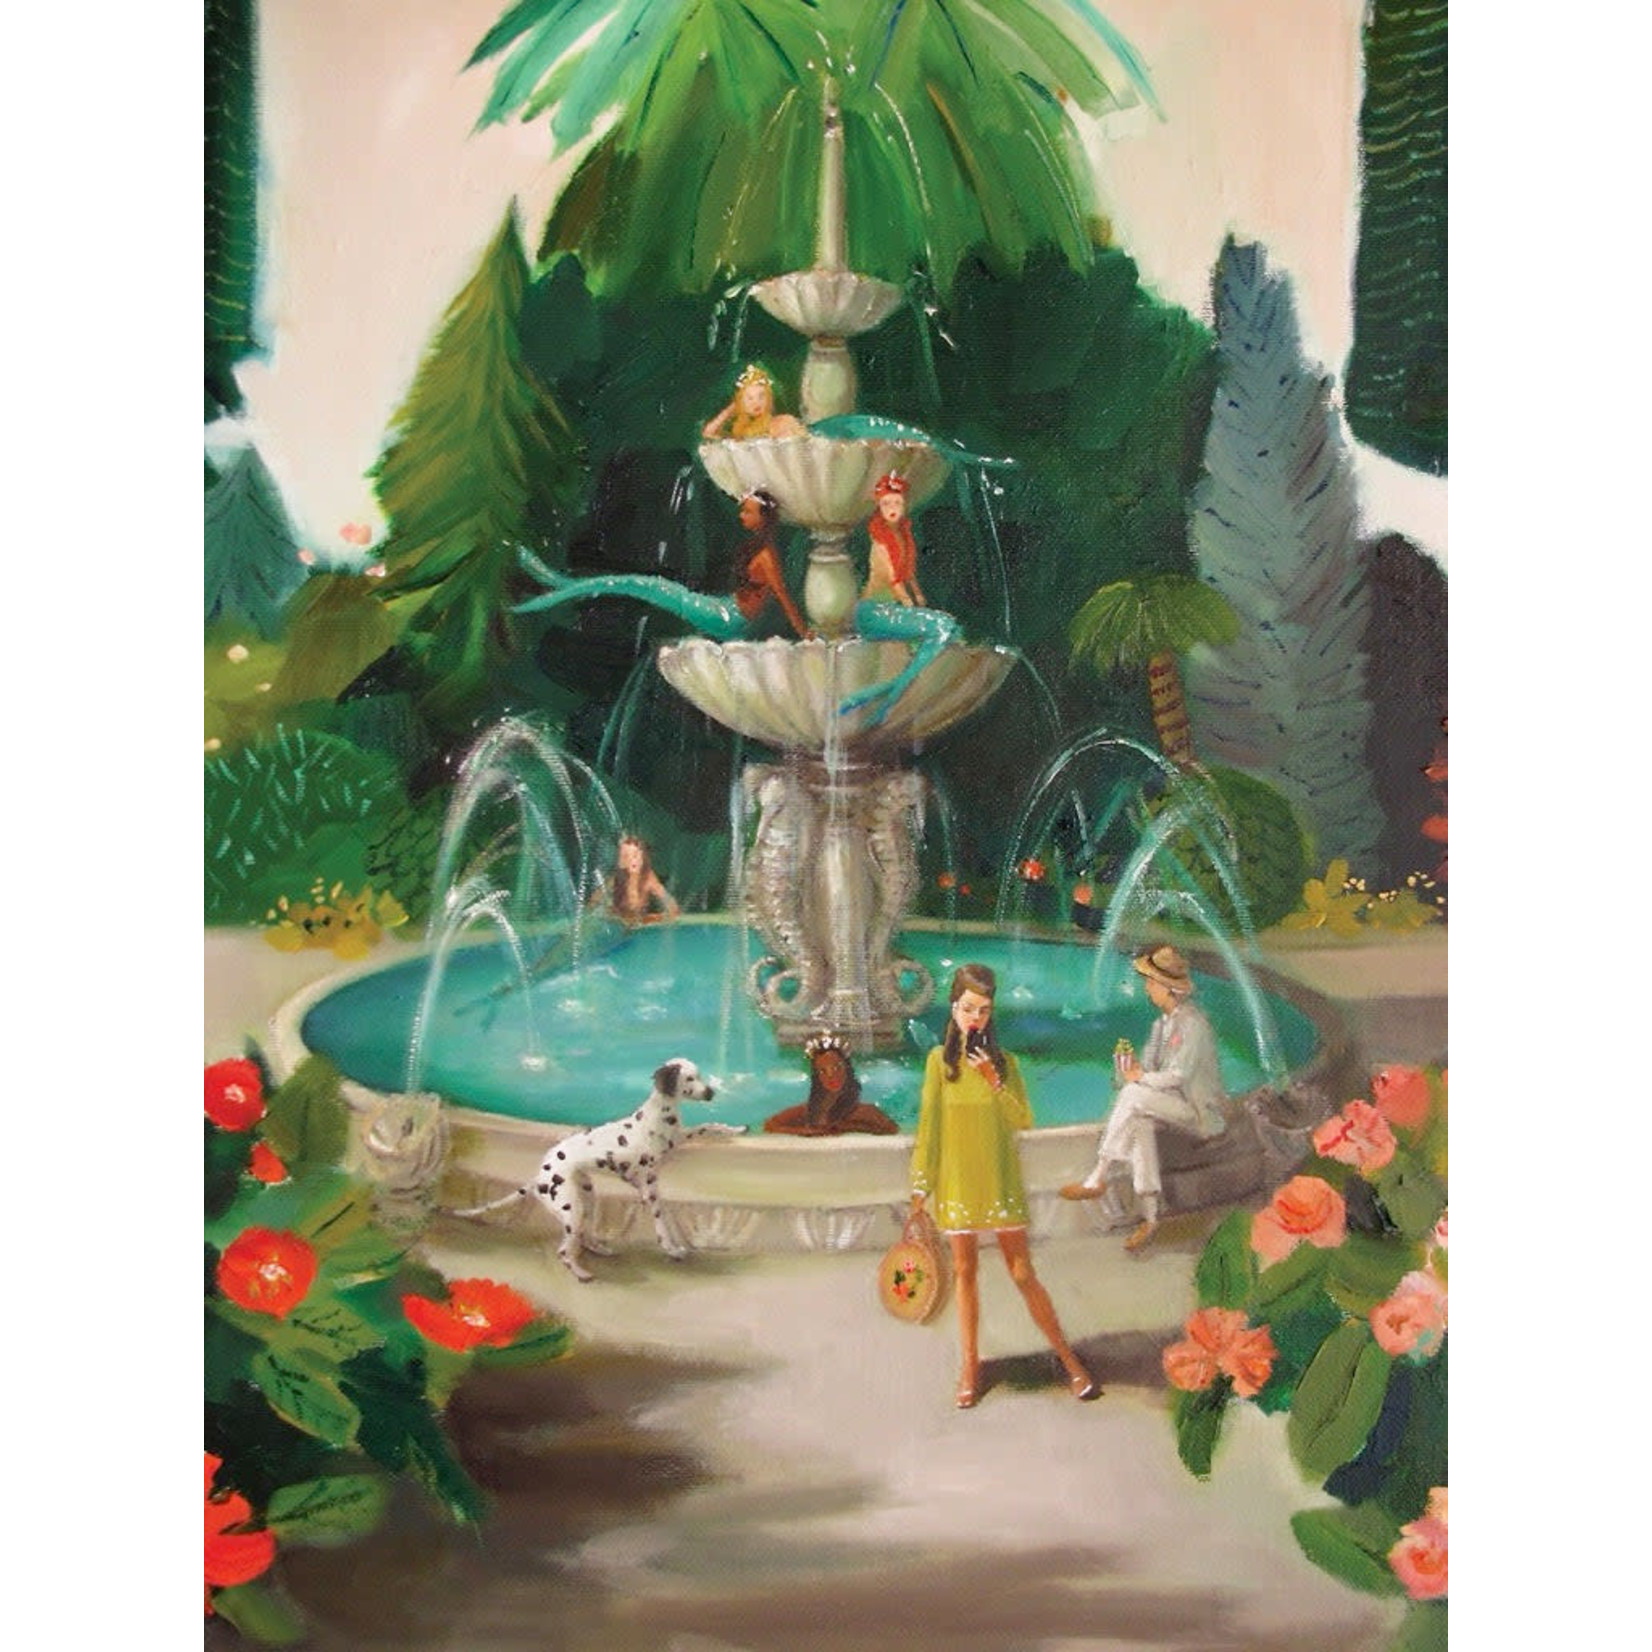 New York Puzzle Co Janet Hill Studio - Mermaid Fountain 1000 Piece Puzzle